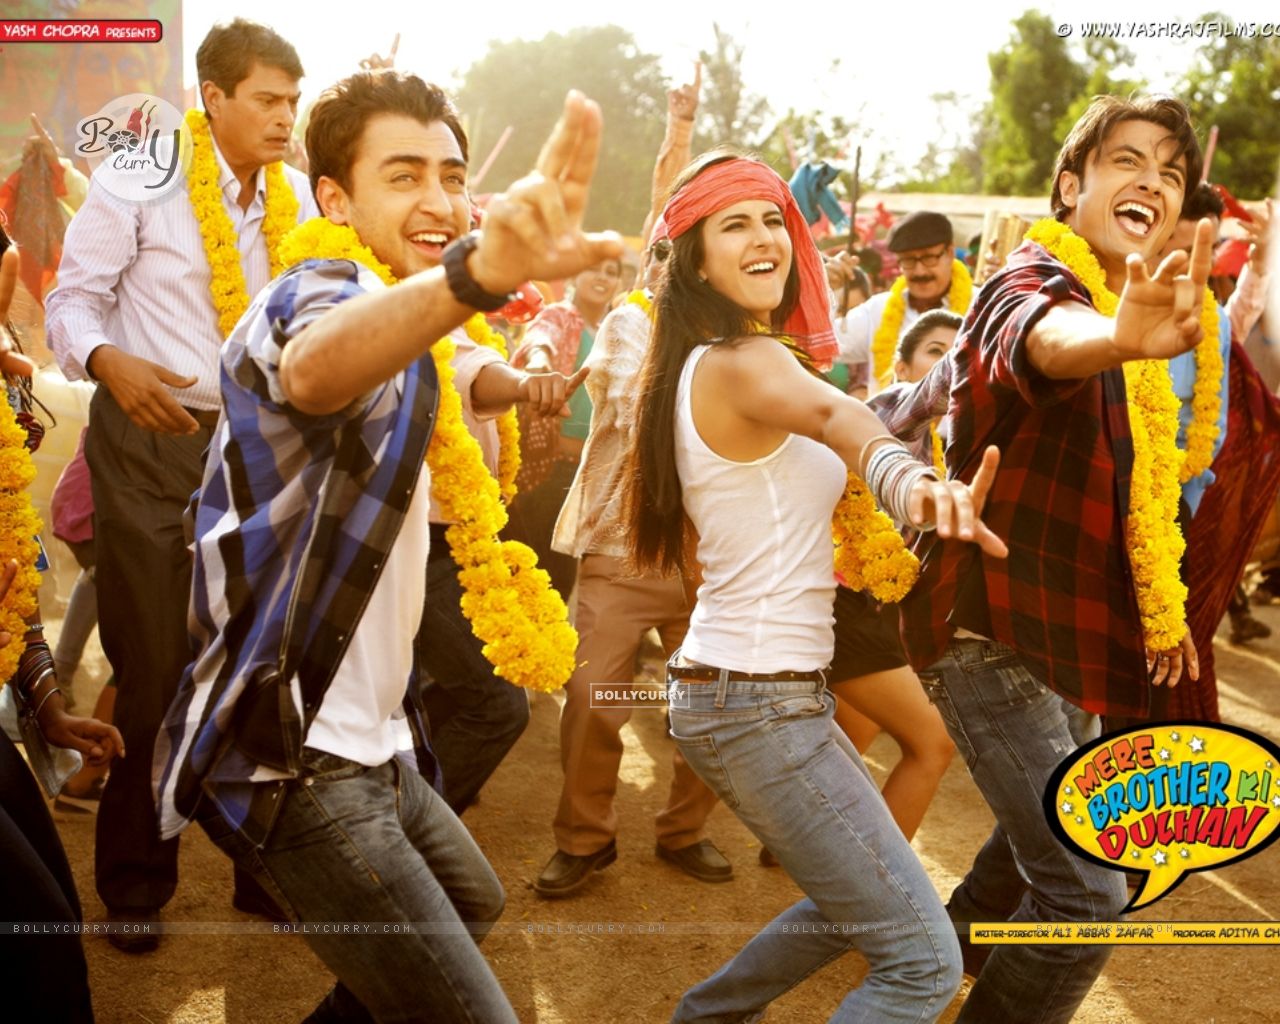 http://img.bollycurry.com/wallpapers/1280x1024/156105-still-scene-from-mere-brother-ki-dulhan.jpg